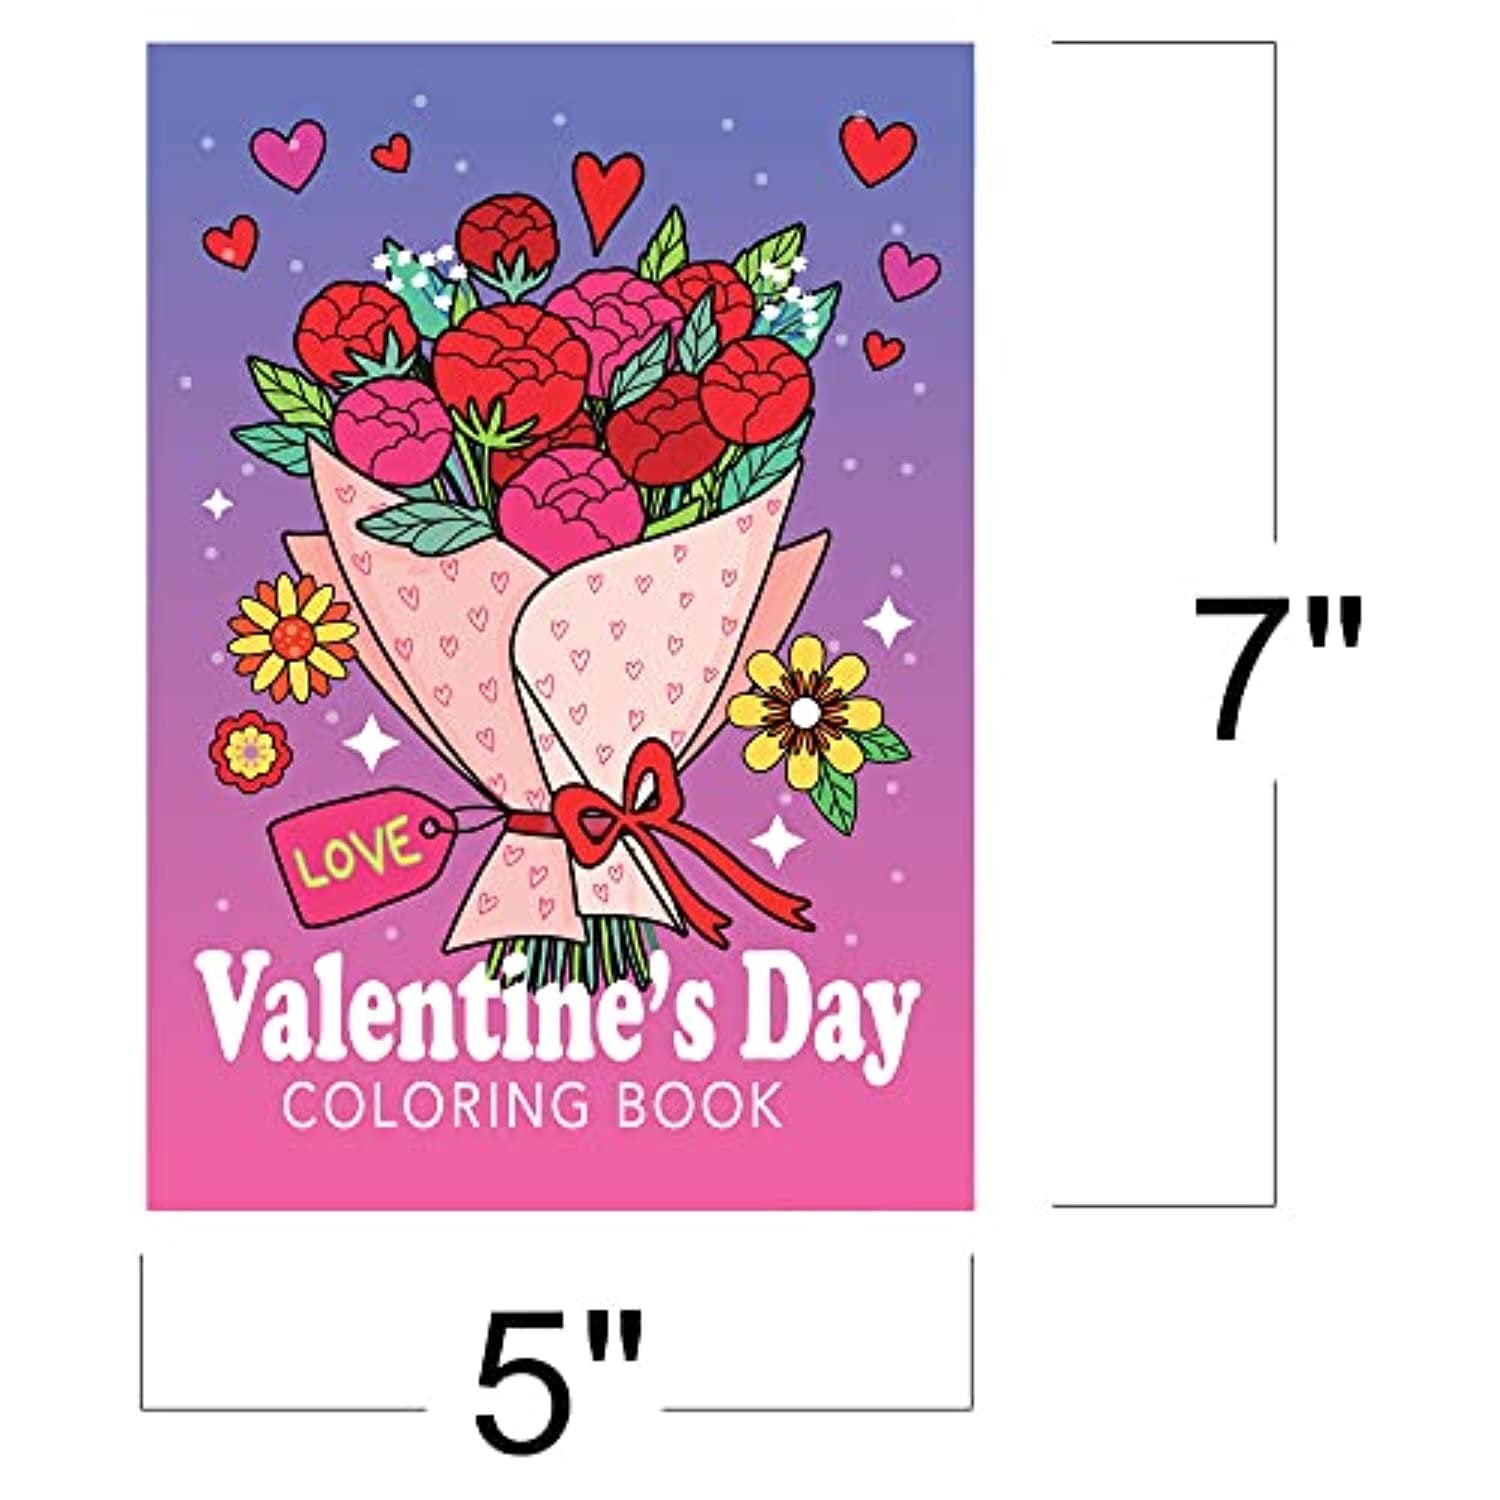 Valentines Day Coloring Books for Kids, Bulk Color Booklets in 5 Designs, Pack of 20